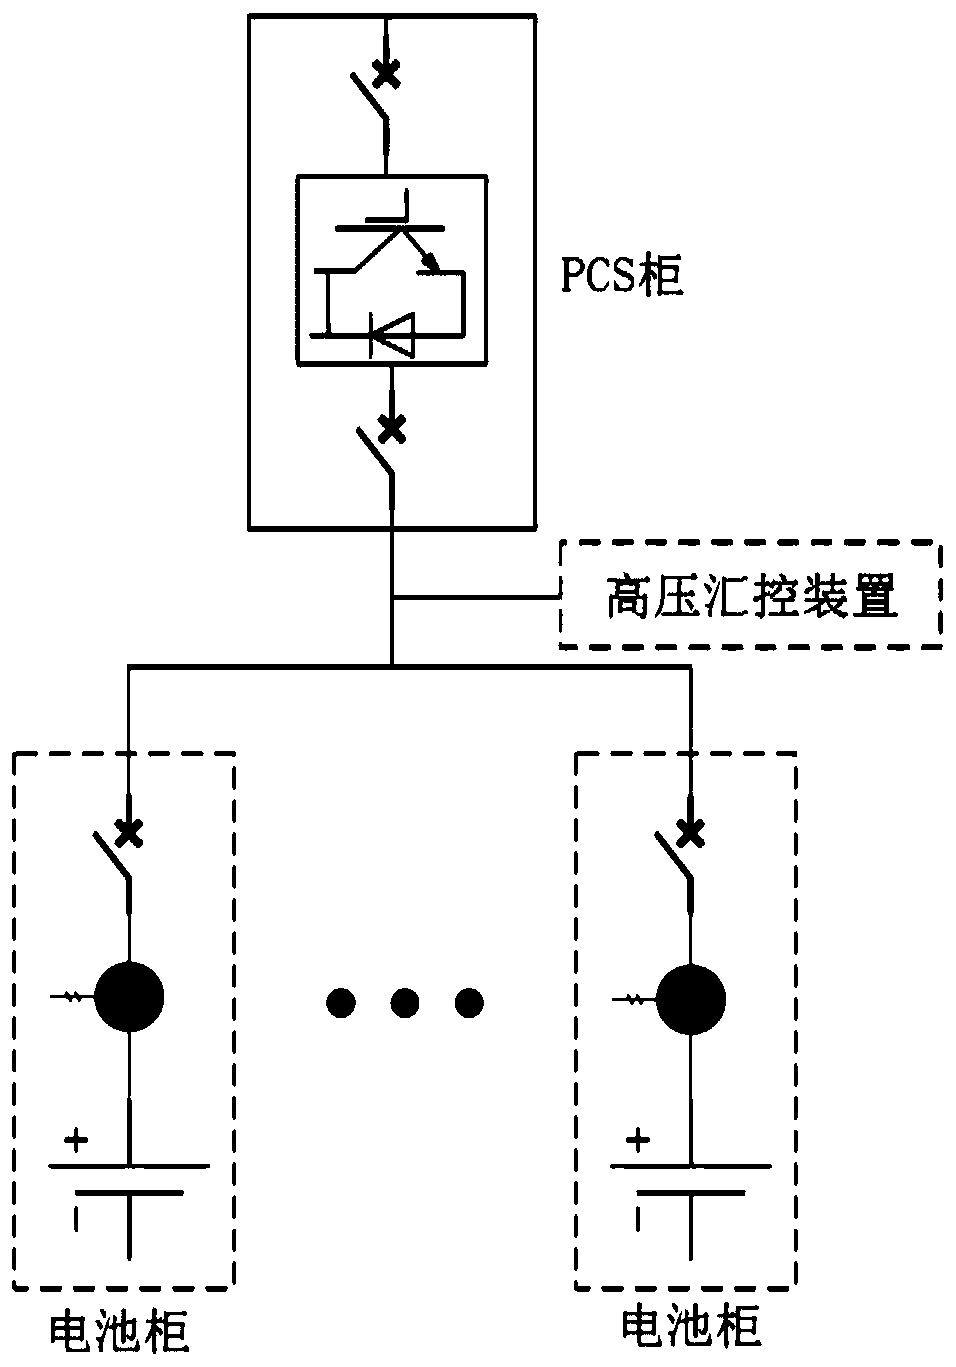 Direct current centralized control system